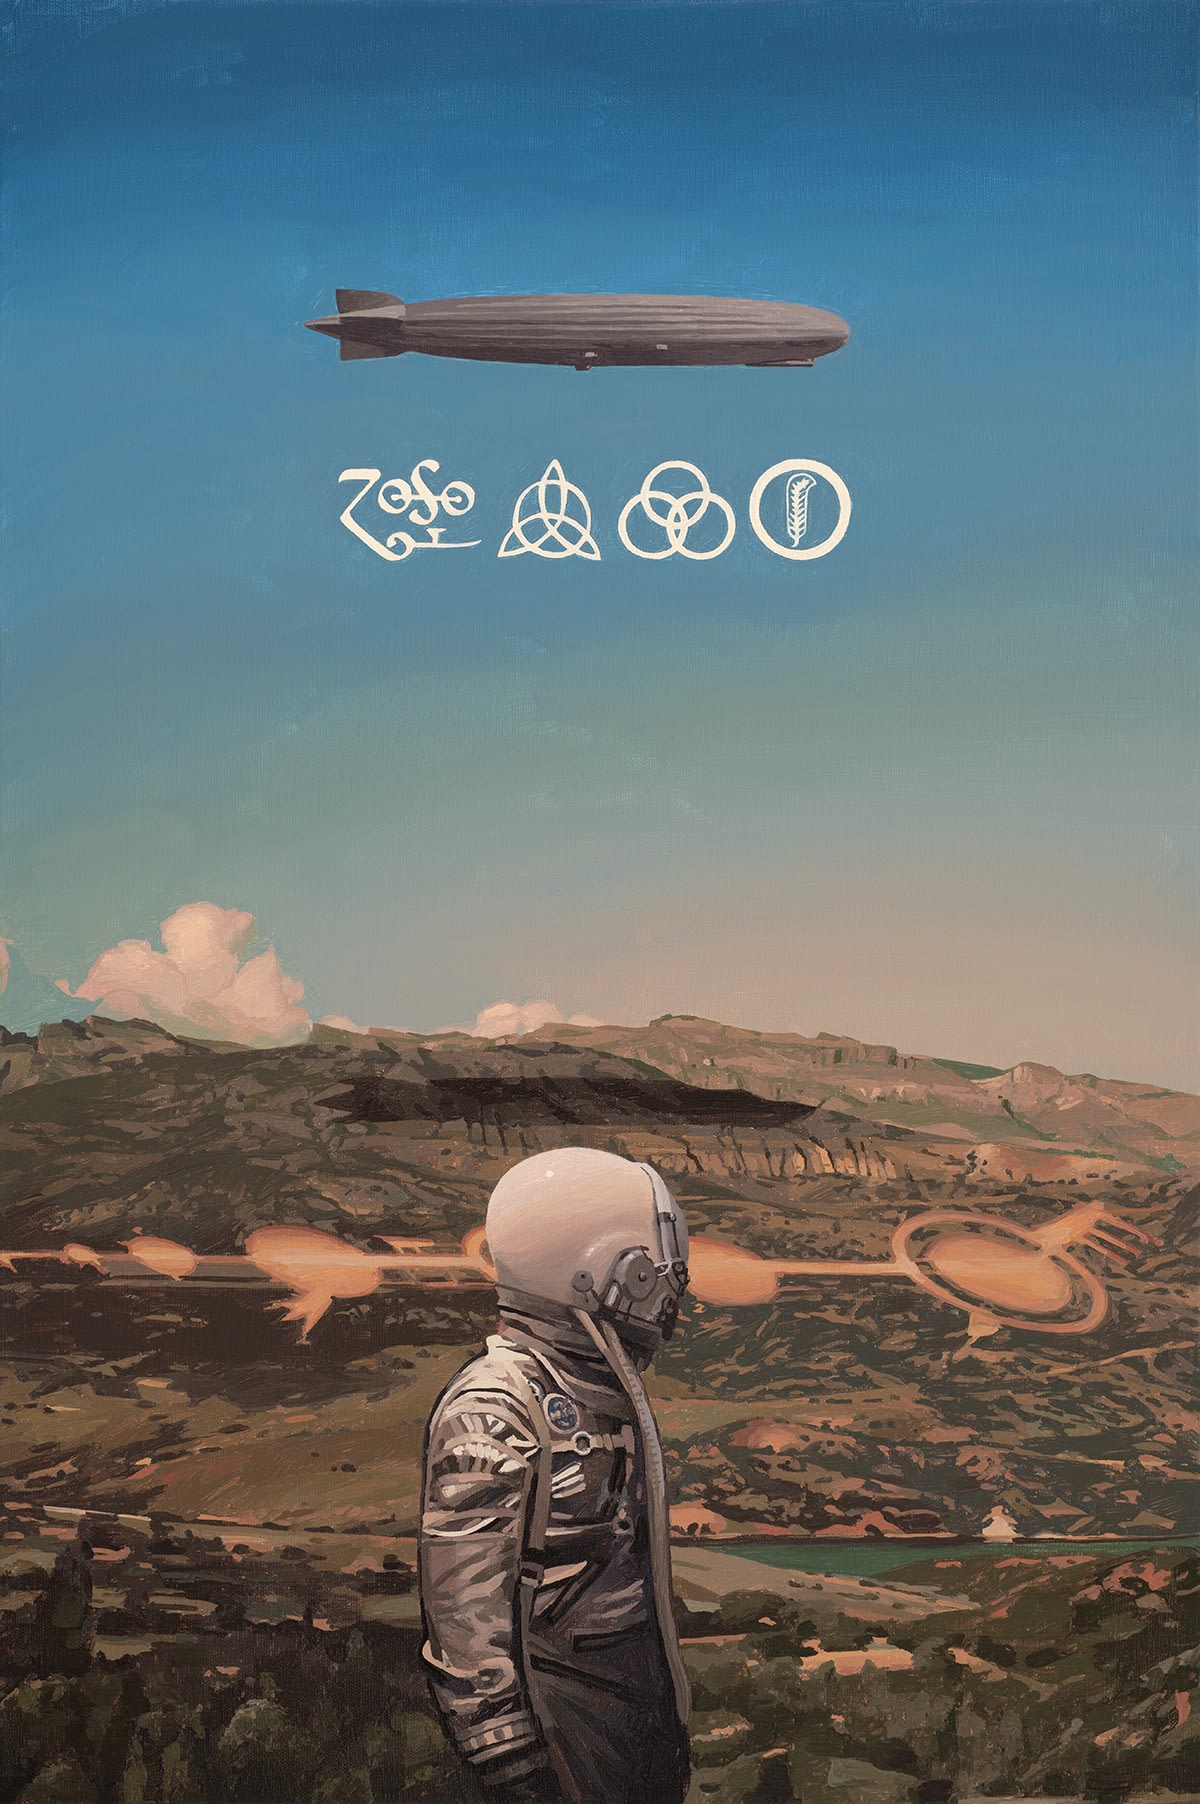 painting of an astronaut and a zepplin airship by Scott Listfield